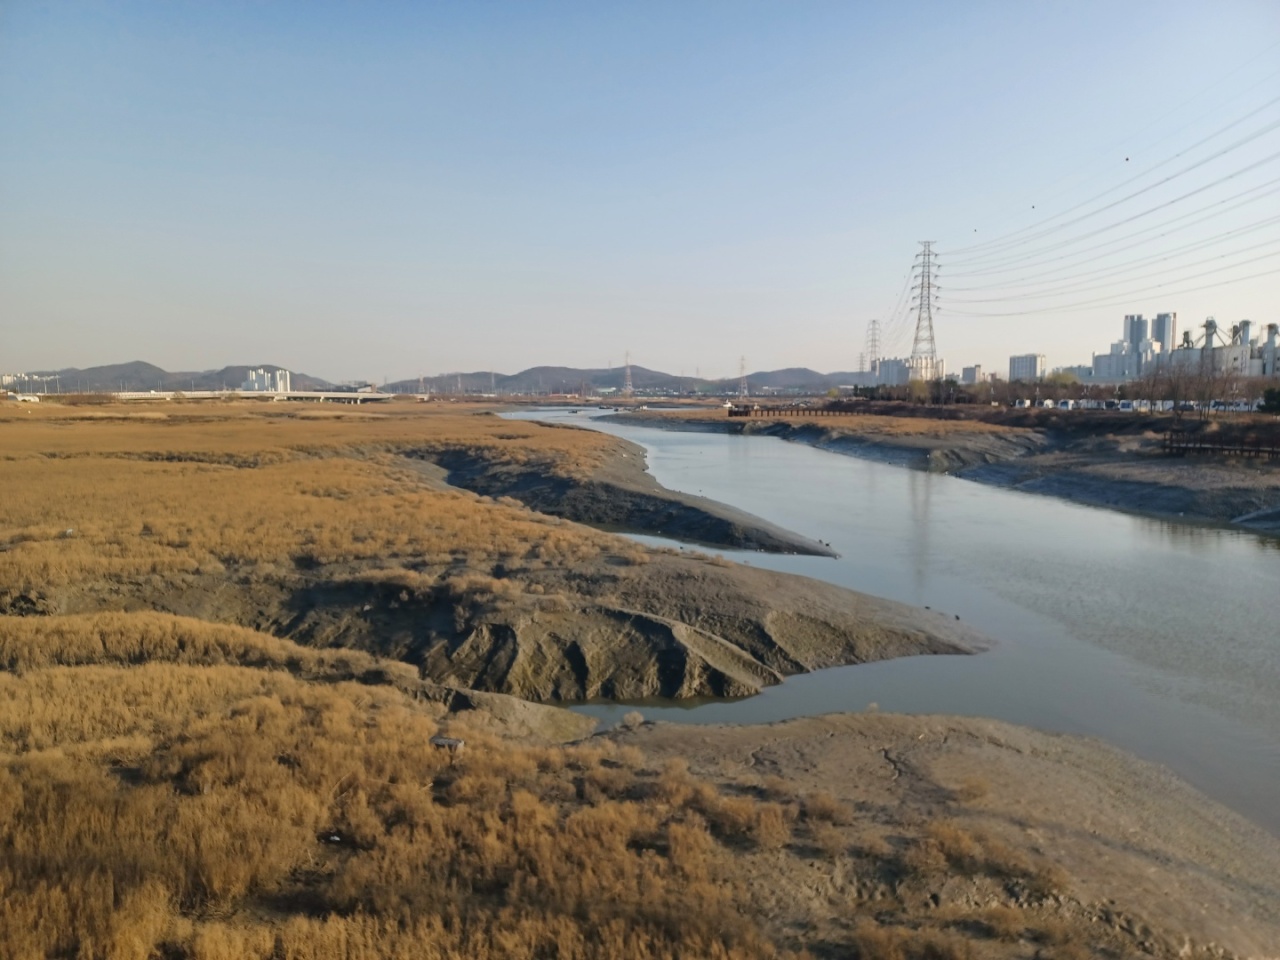 Areas of tidal flats are visible after crossing the Soyeom Bridge near the park entrance.  (Lee Si-jin/The Korea Herald)